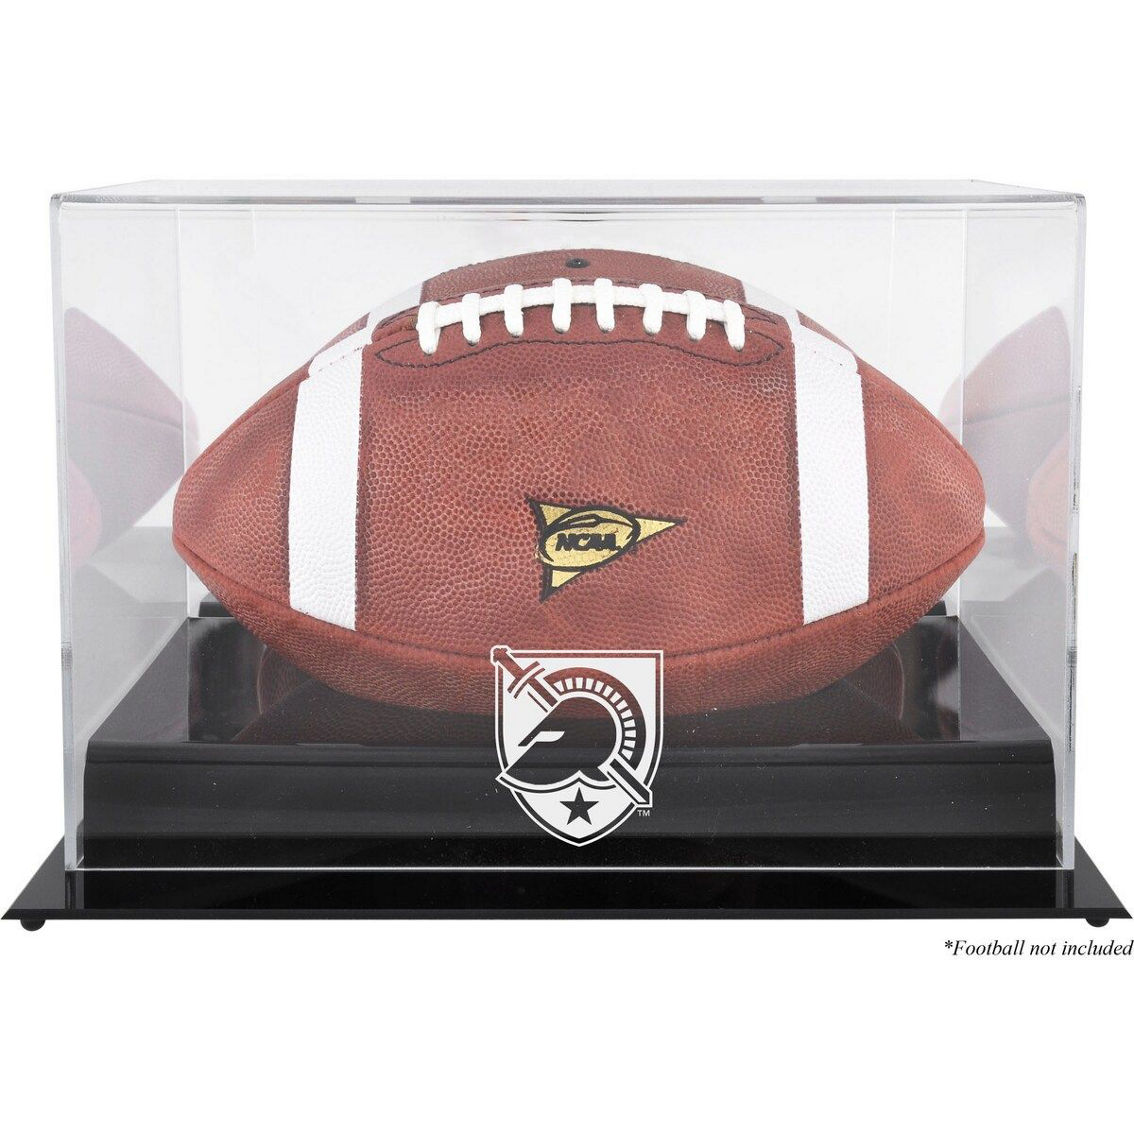 Fanatics Authentic Army Black Knights Black Base Team (2015-Present Logo) Football Display Case with Mirror Back - Image 2 of 2